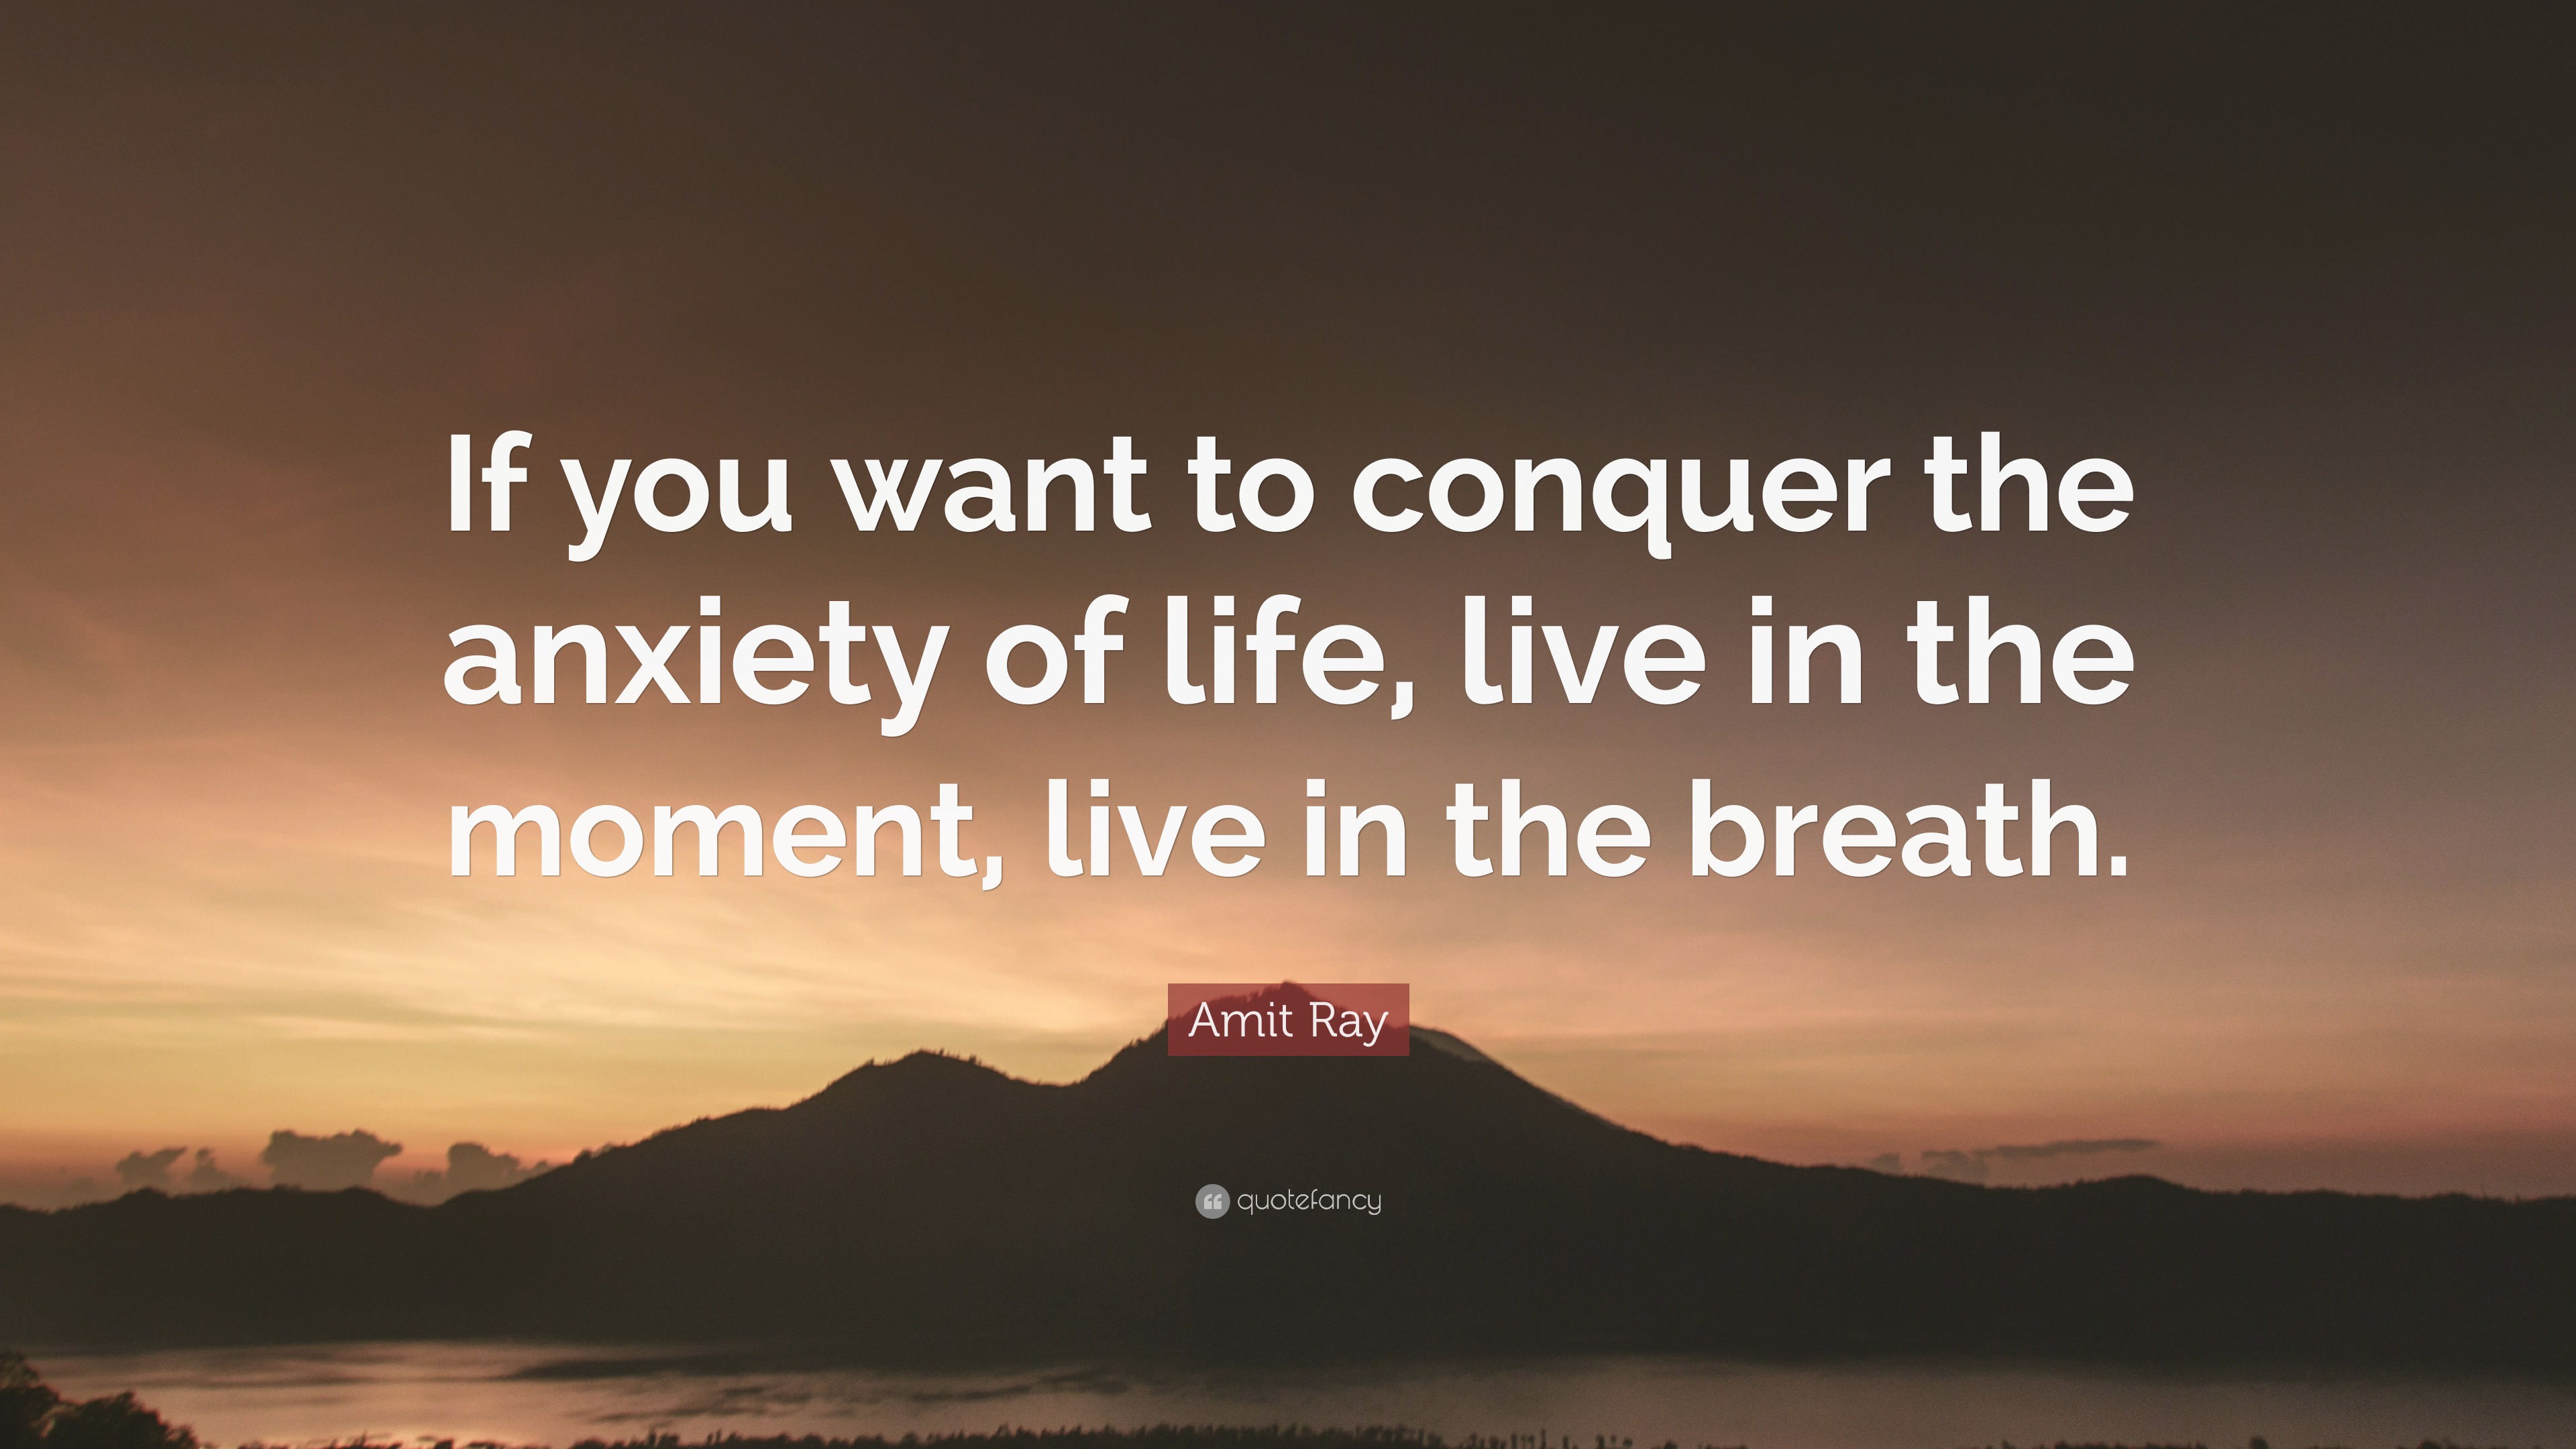 live life in the moment quotes amit ray quote u201cif you want to conquer the anxiety of life live